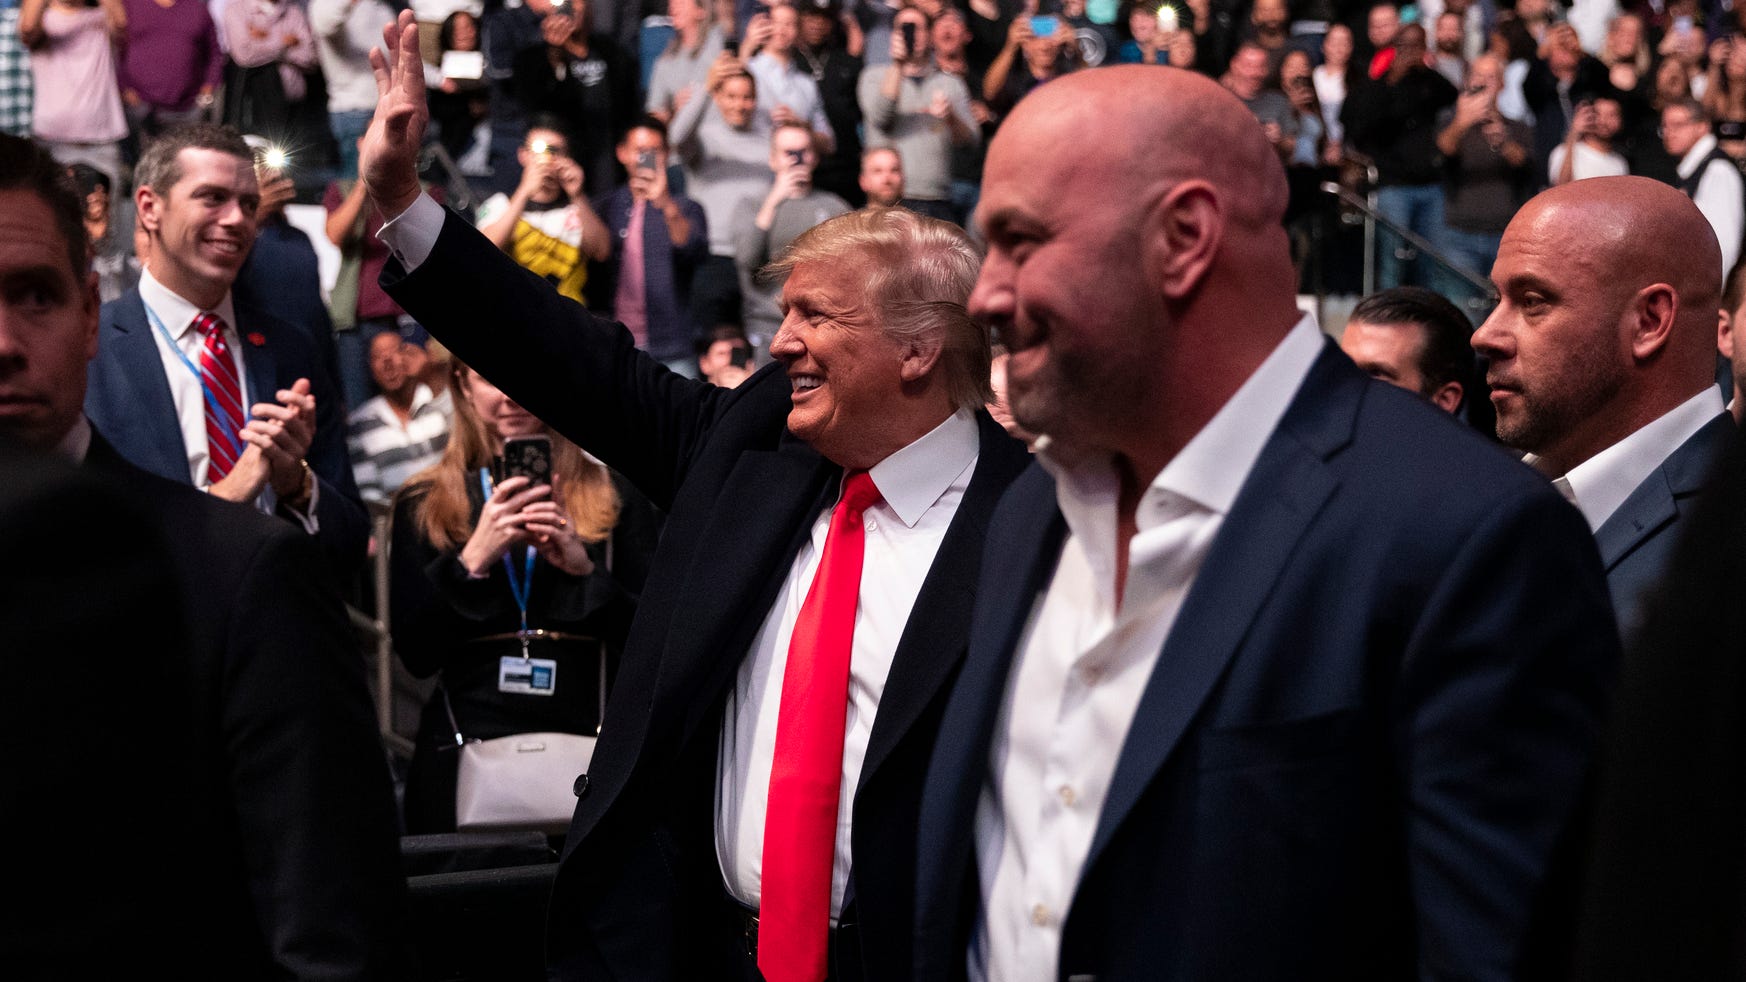 Ufc 244 President Donald Trump Met With Protests Mixed Reaction